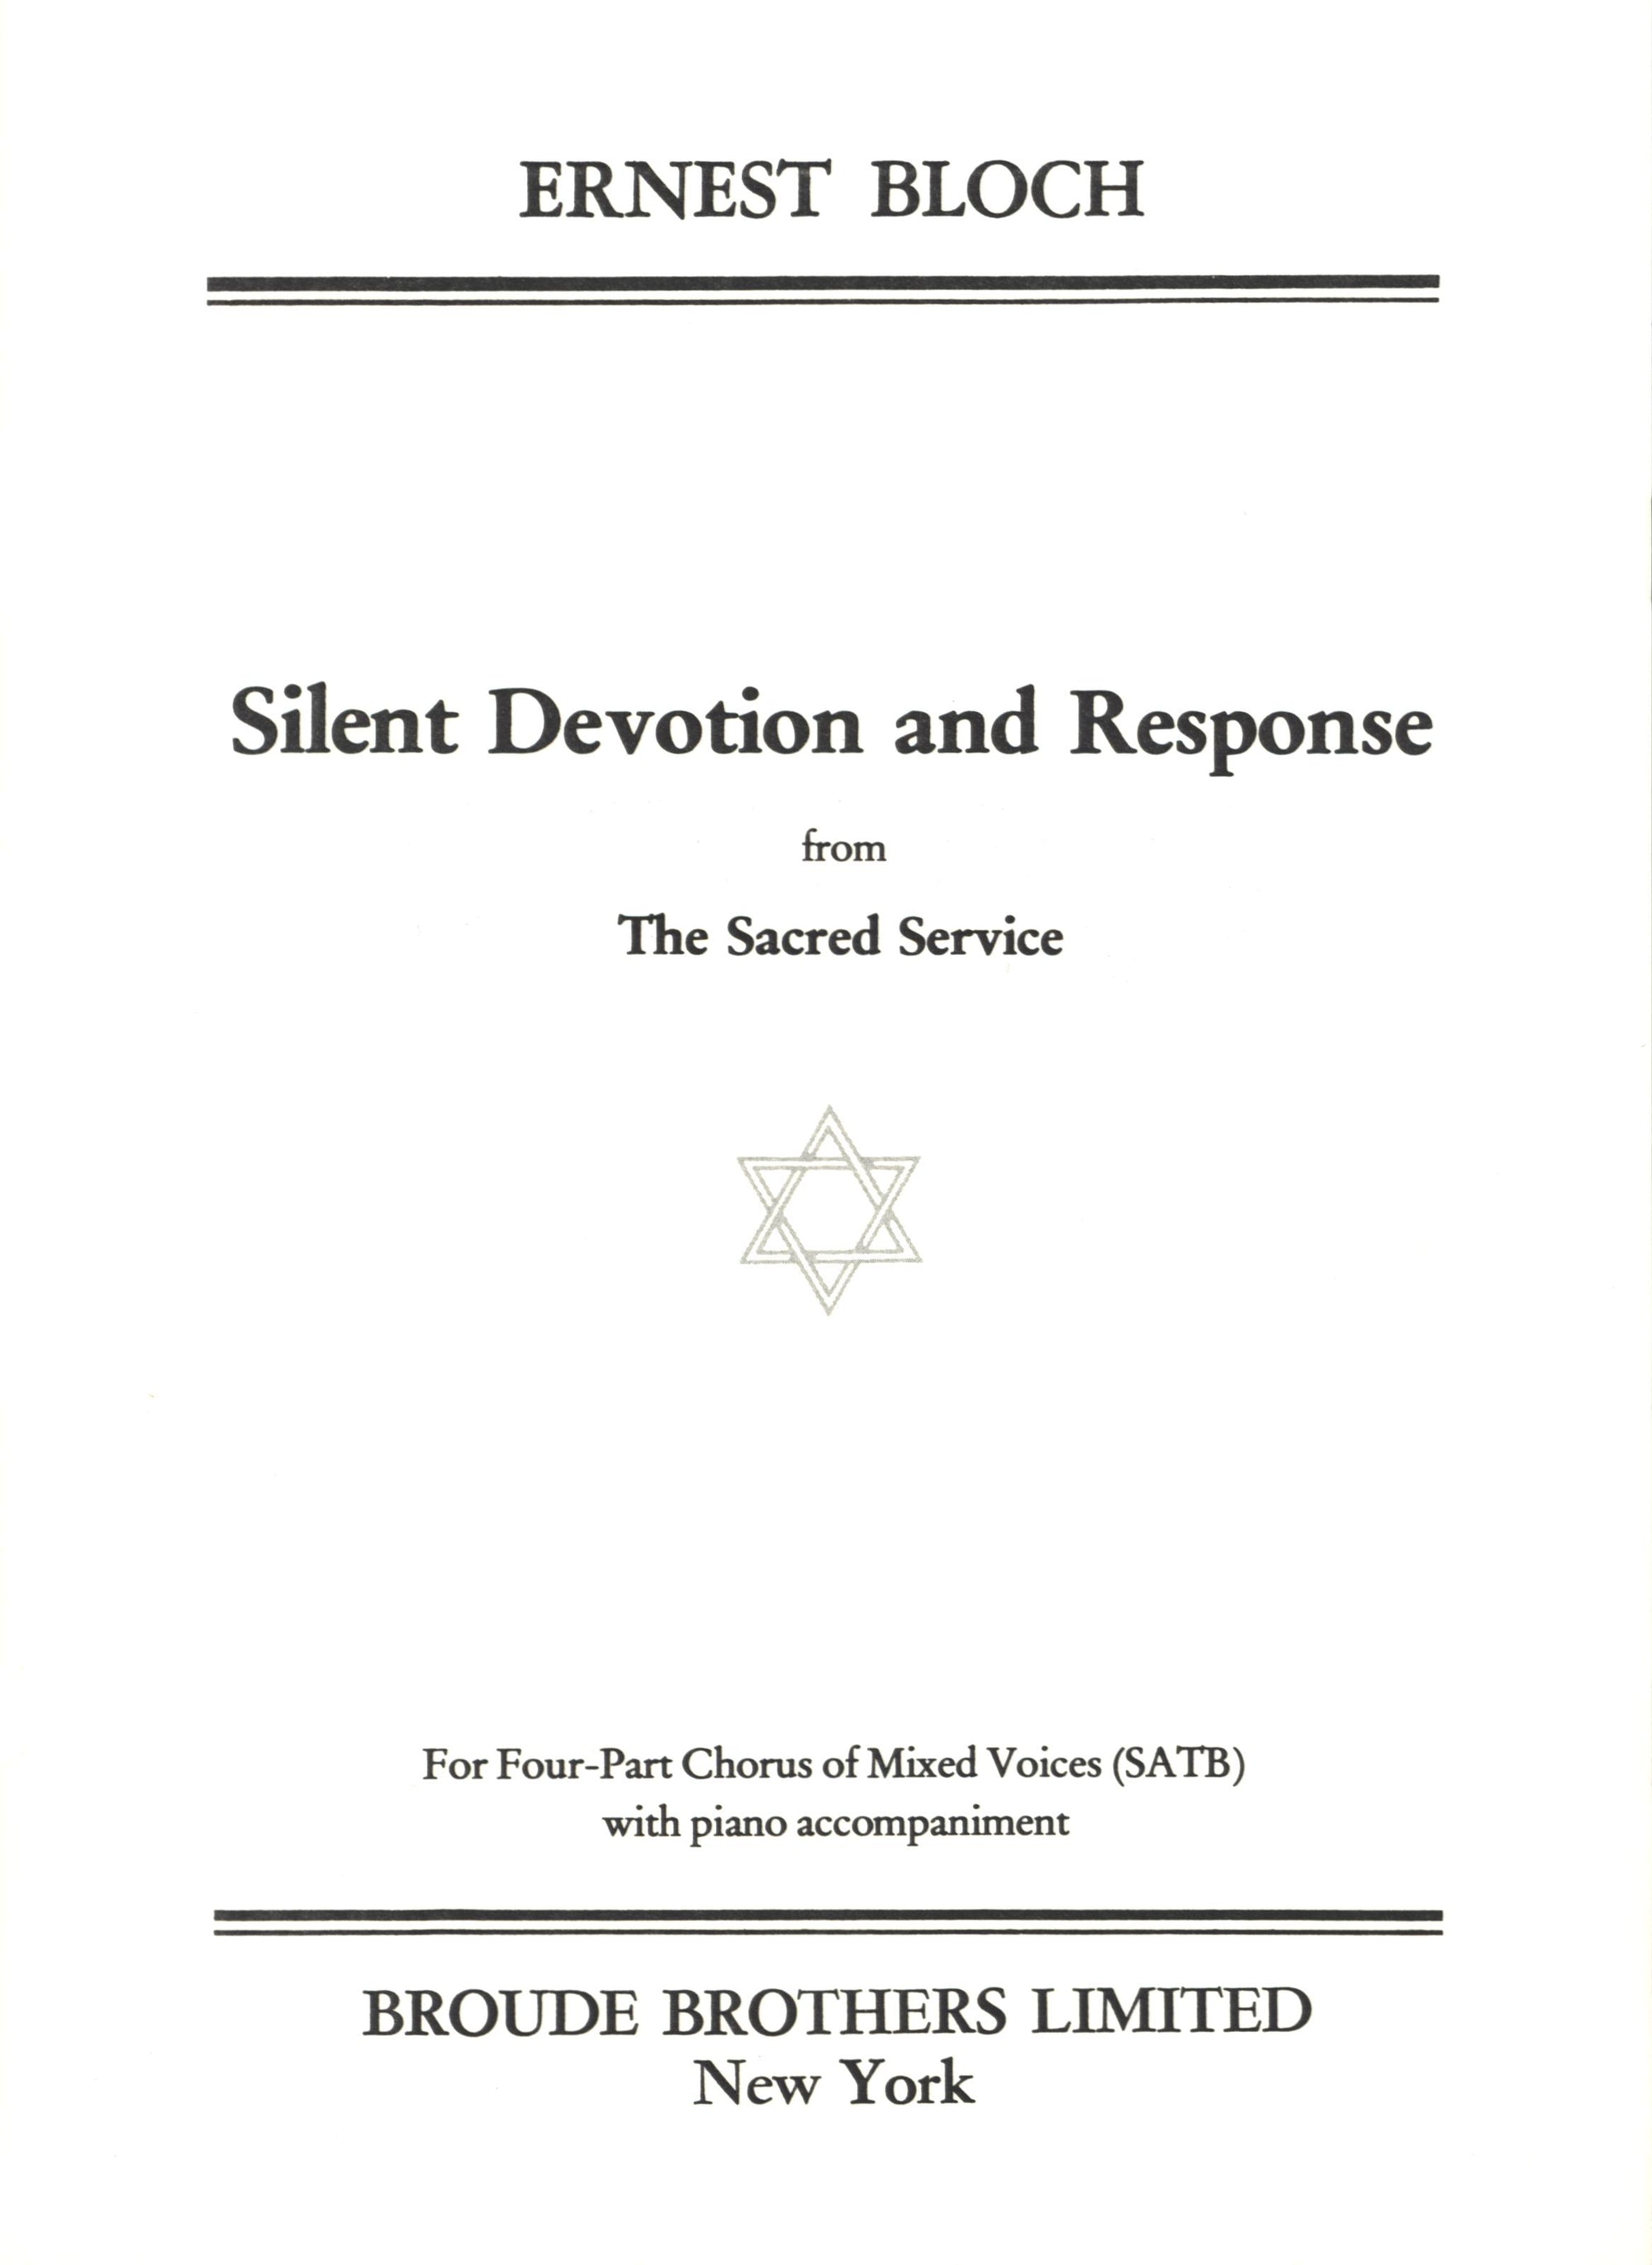 Bloch: Silent Devotion and Response